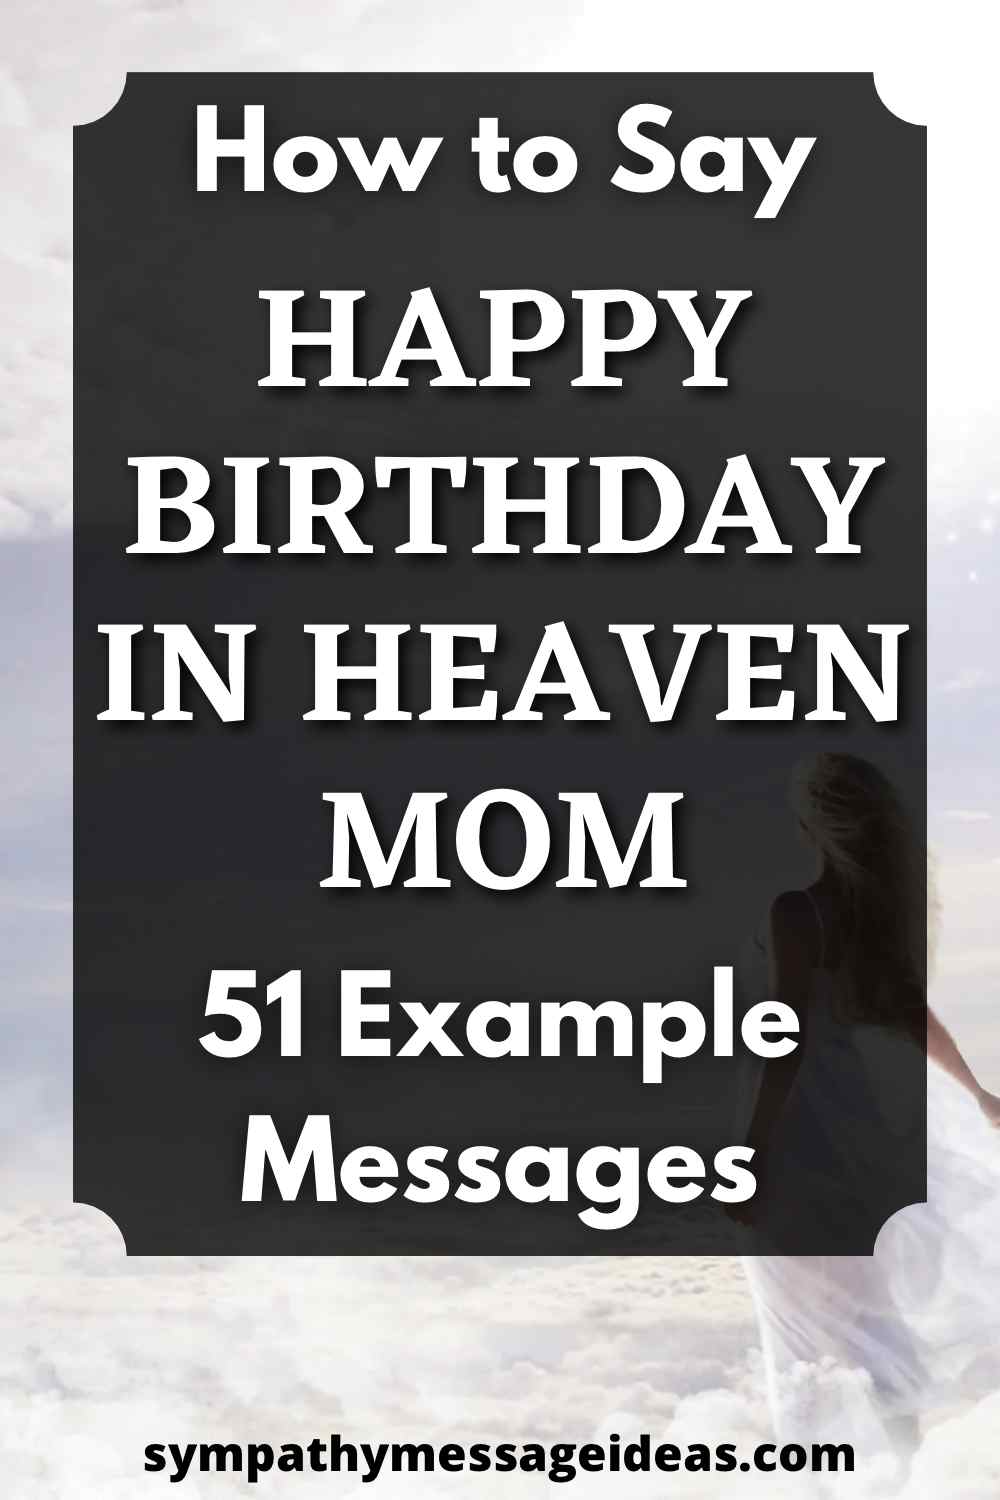 Happy Birthday Mom in Heaven Archives Card Messages